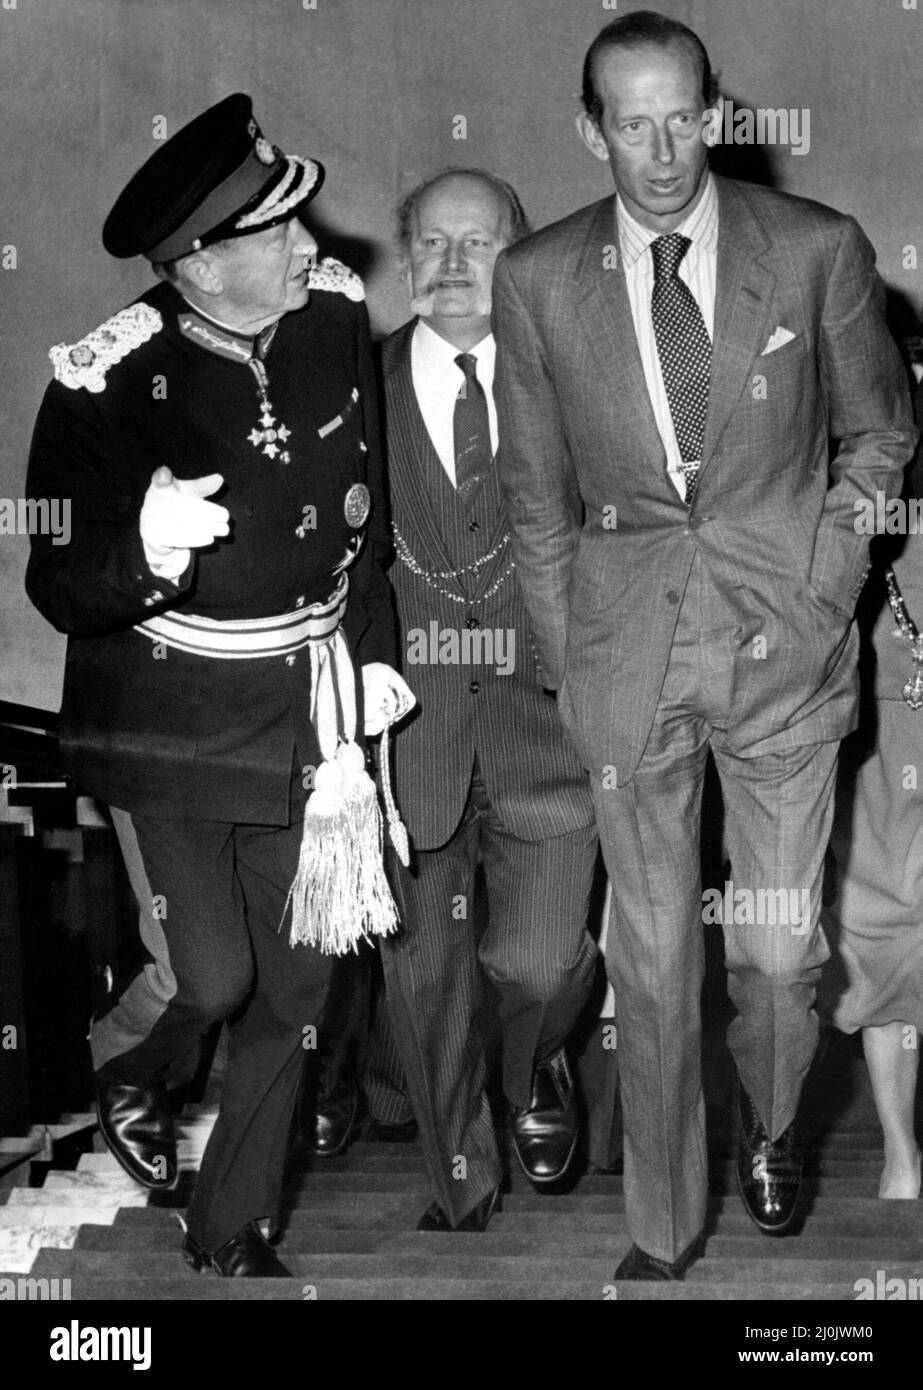 Prince Edward of Kent - The Duke and Duchess of Kent  North East Royal Visits  The Duke of Kent during his visit to Newcastle 11 June 1982 - The Duke with Tyne Wear Lord Lieutenant Sir James Steel arriving at North of England Development Council annual meeting Stock Photo